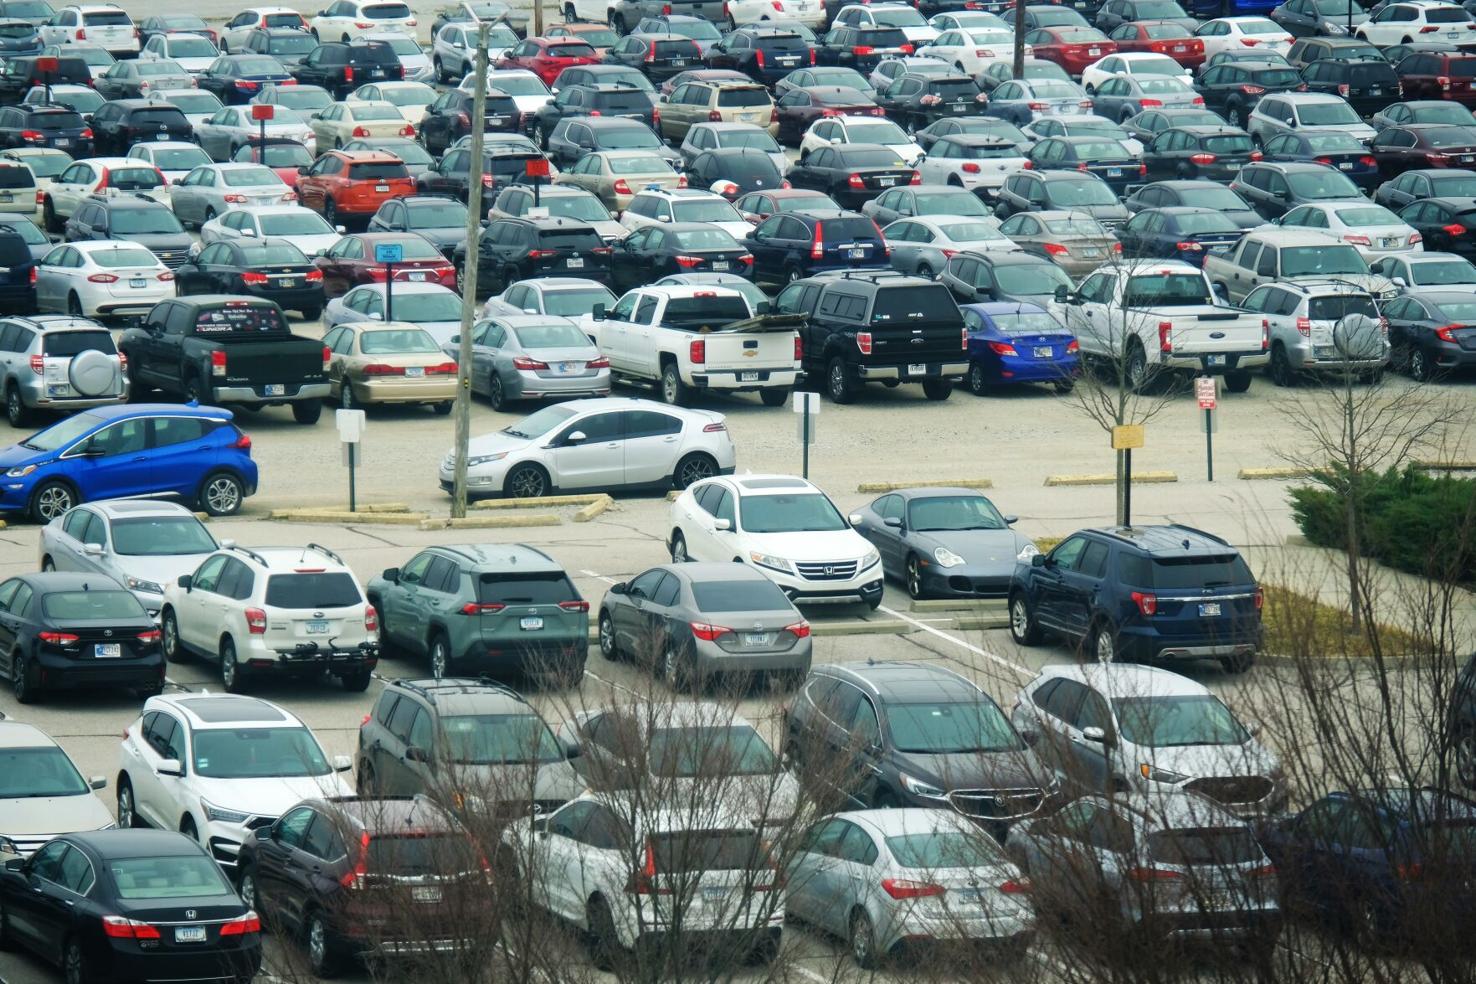 Parking permits now available for most students Campus